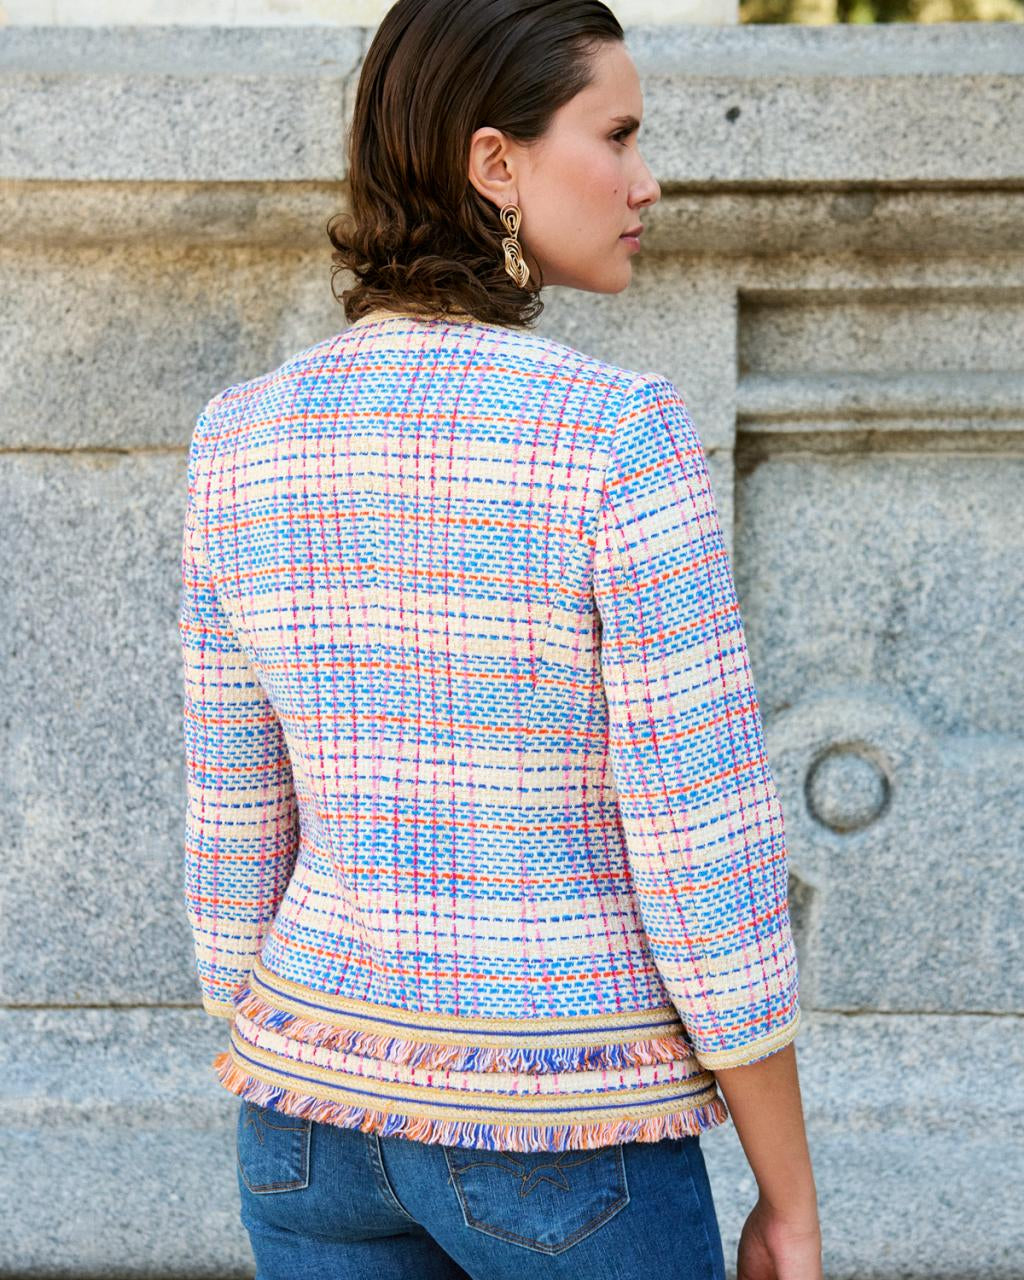 Bariloche Granjuela Tweed Style Frilled Hem Jacket From The Back